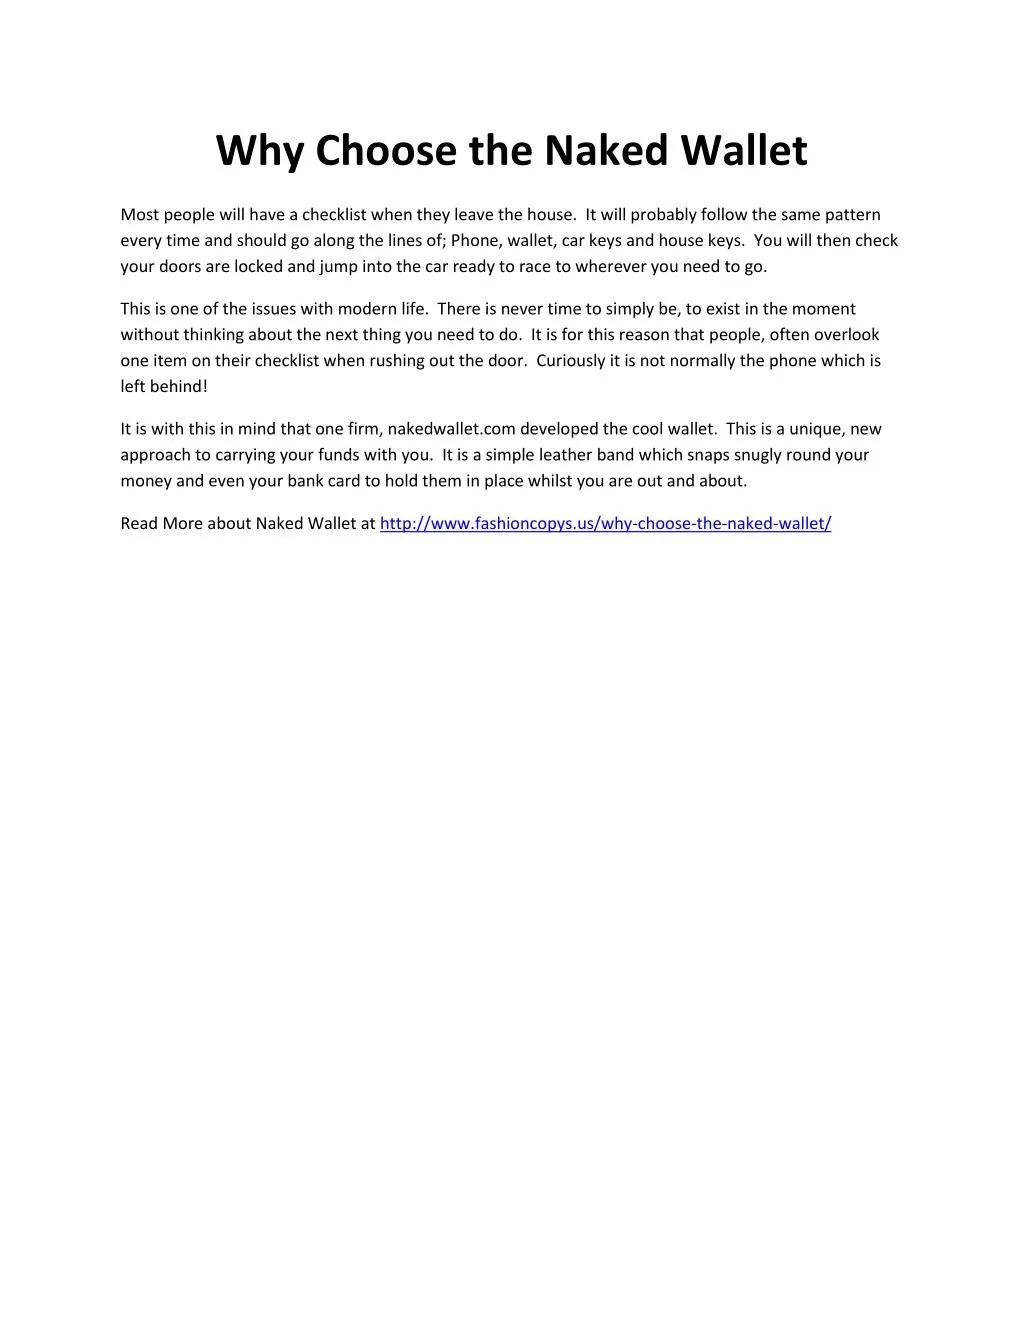 why choose the naked wallet